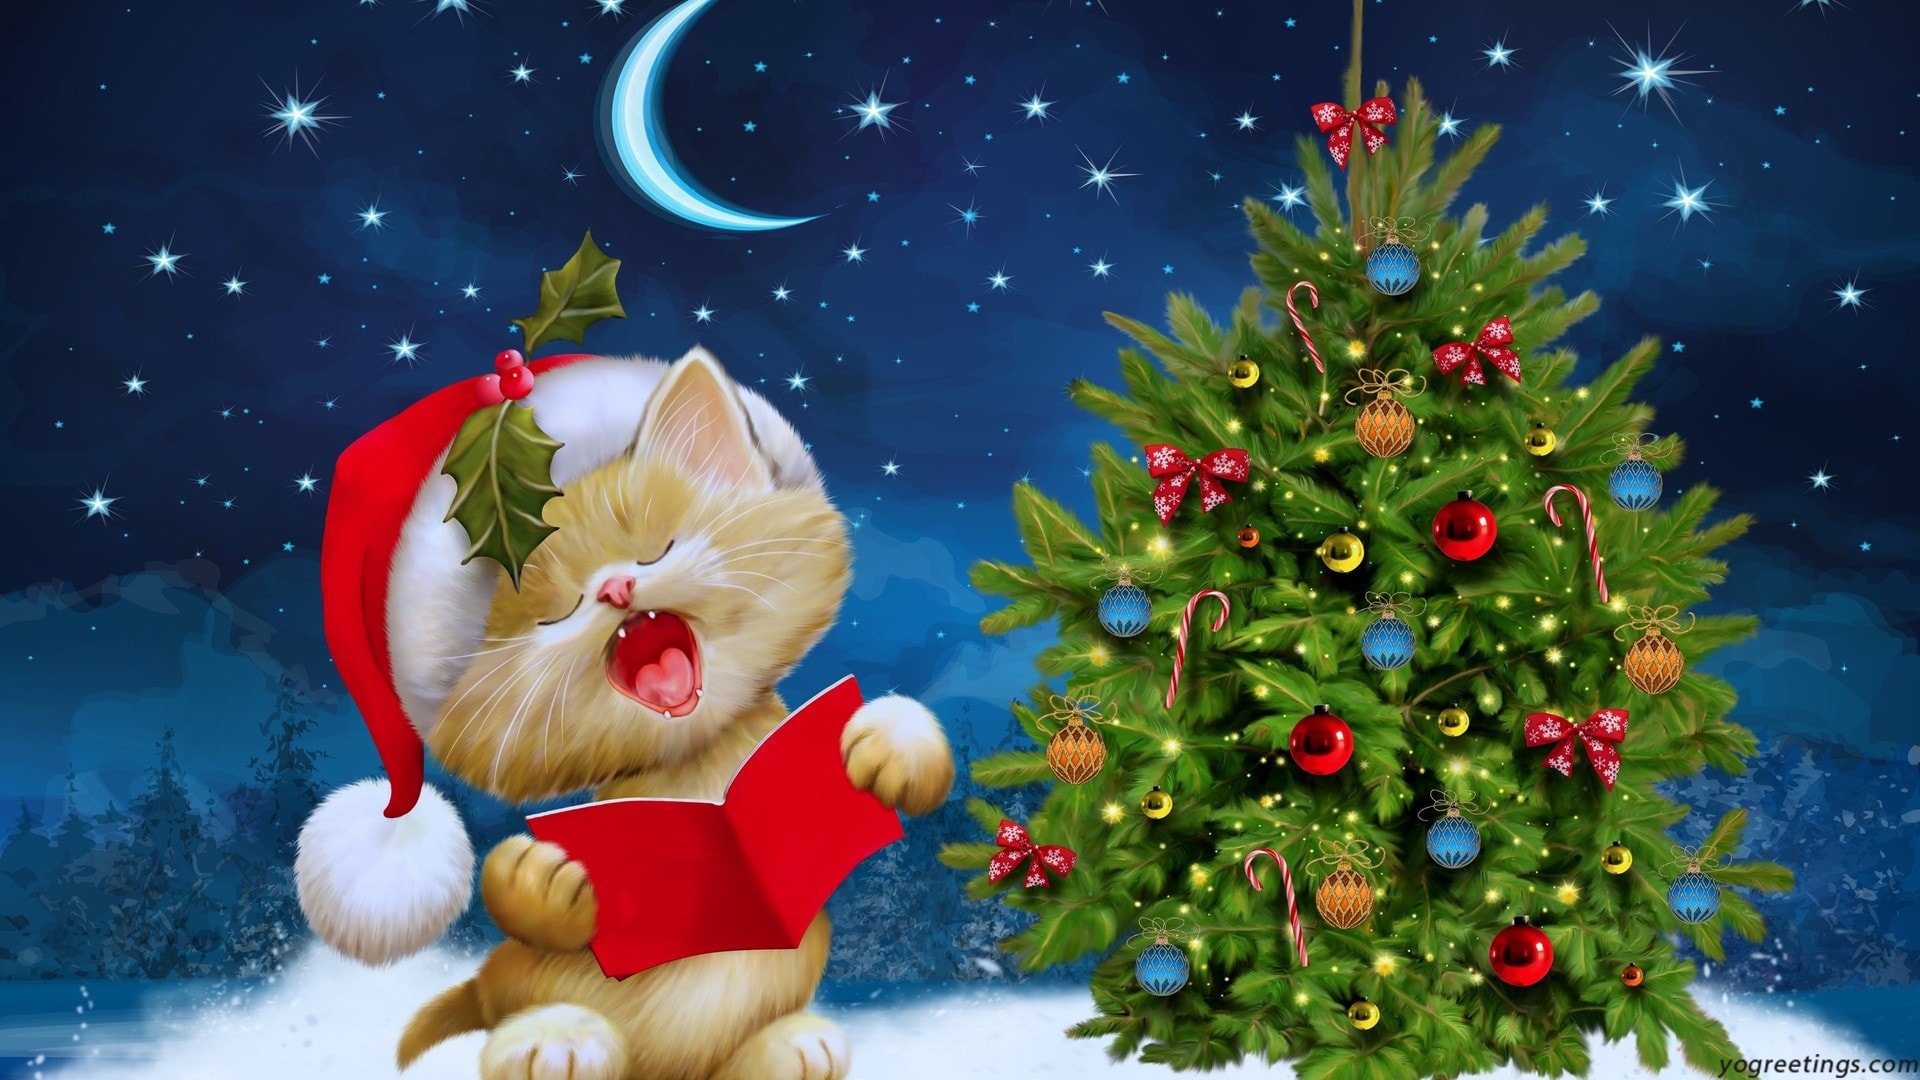 Merry Christmas Wallpaper Full HD Free Download - Images 1